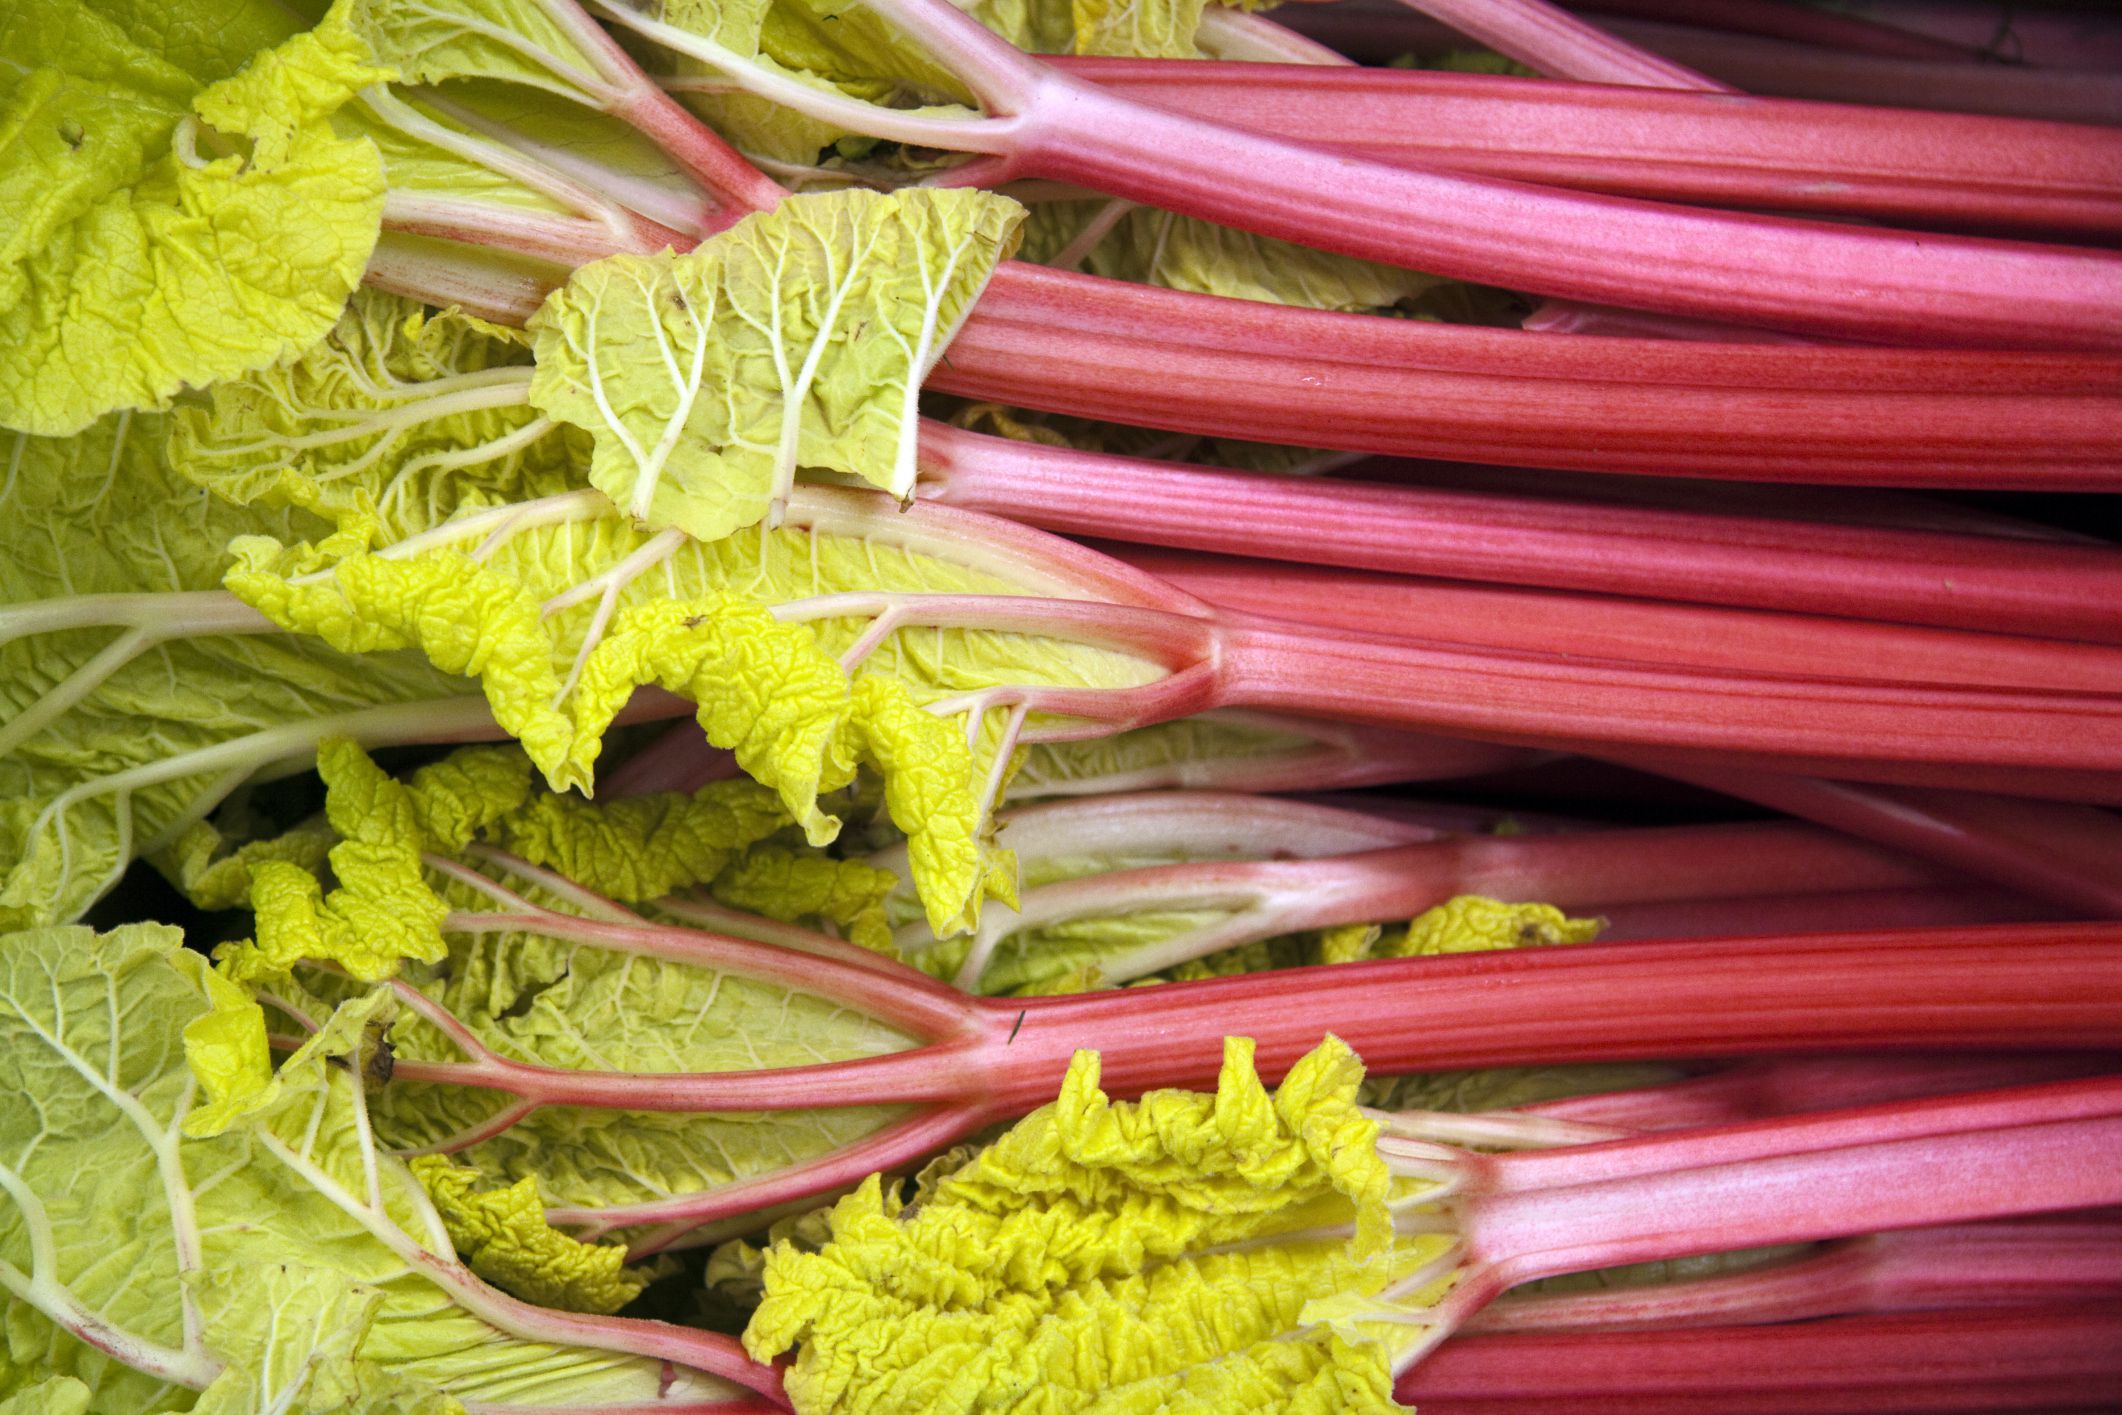 Guide to Buying, Storing, and Using Rhubarb